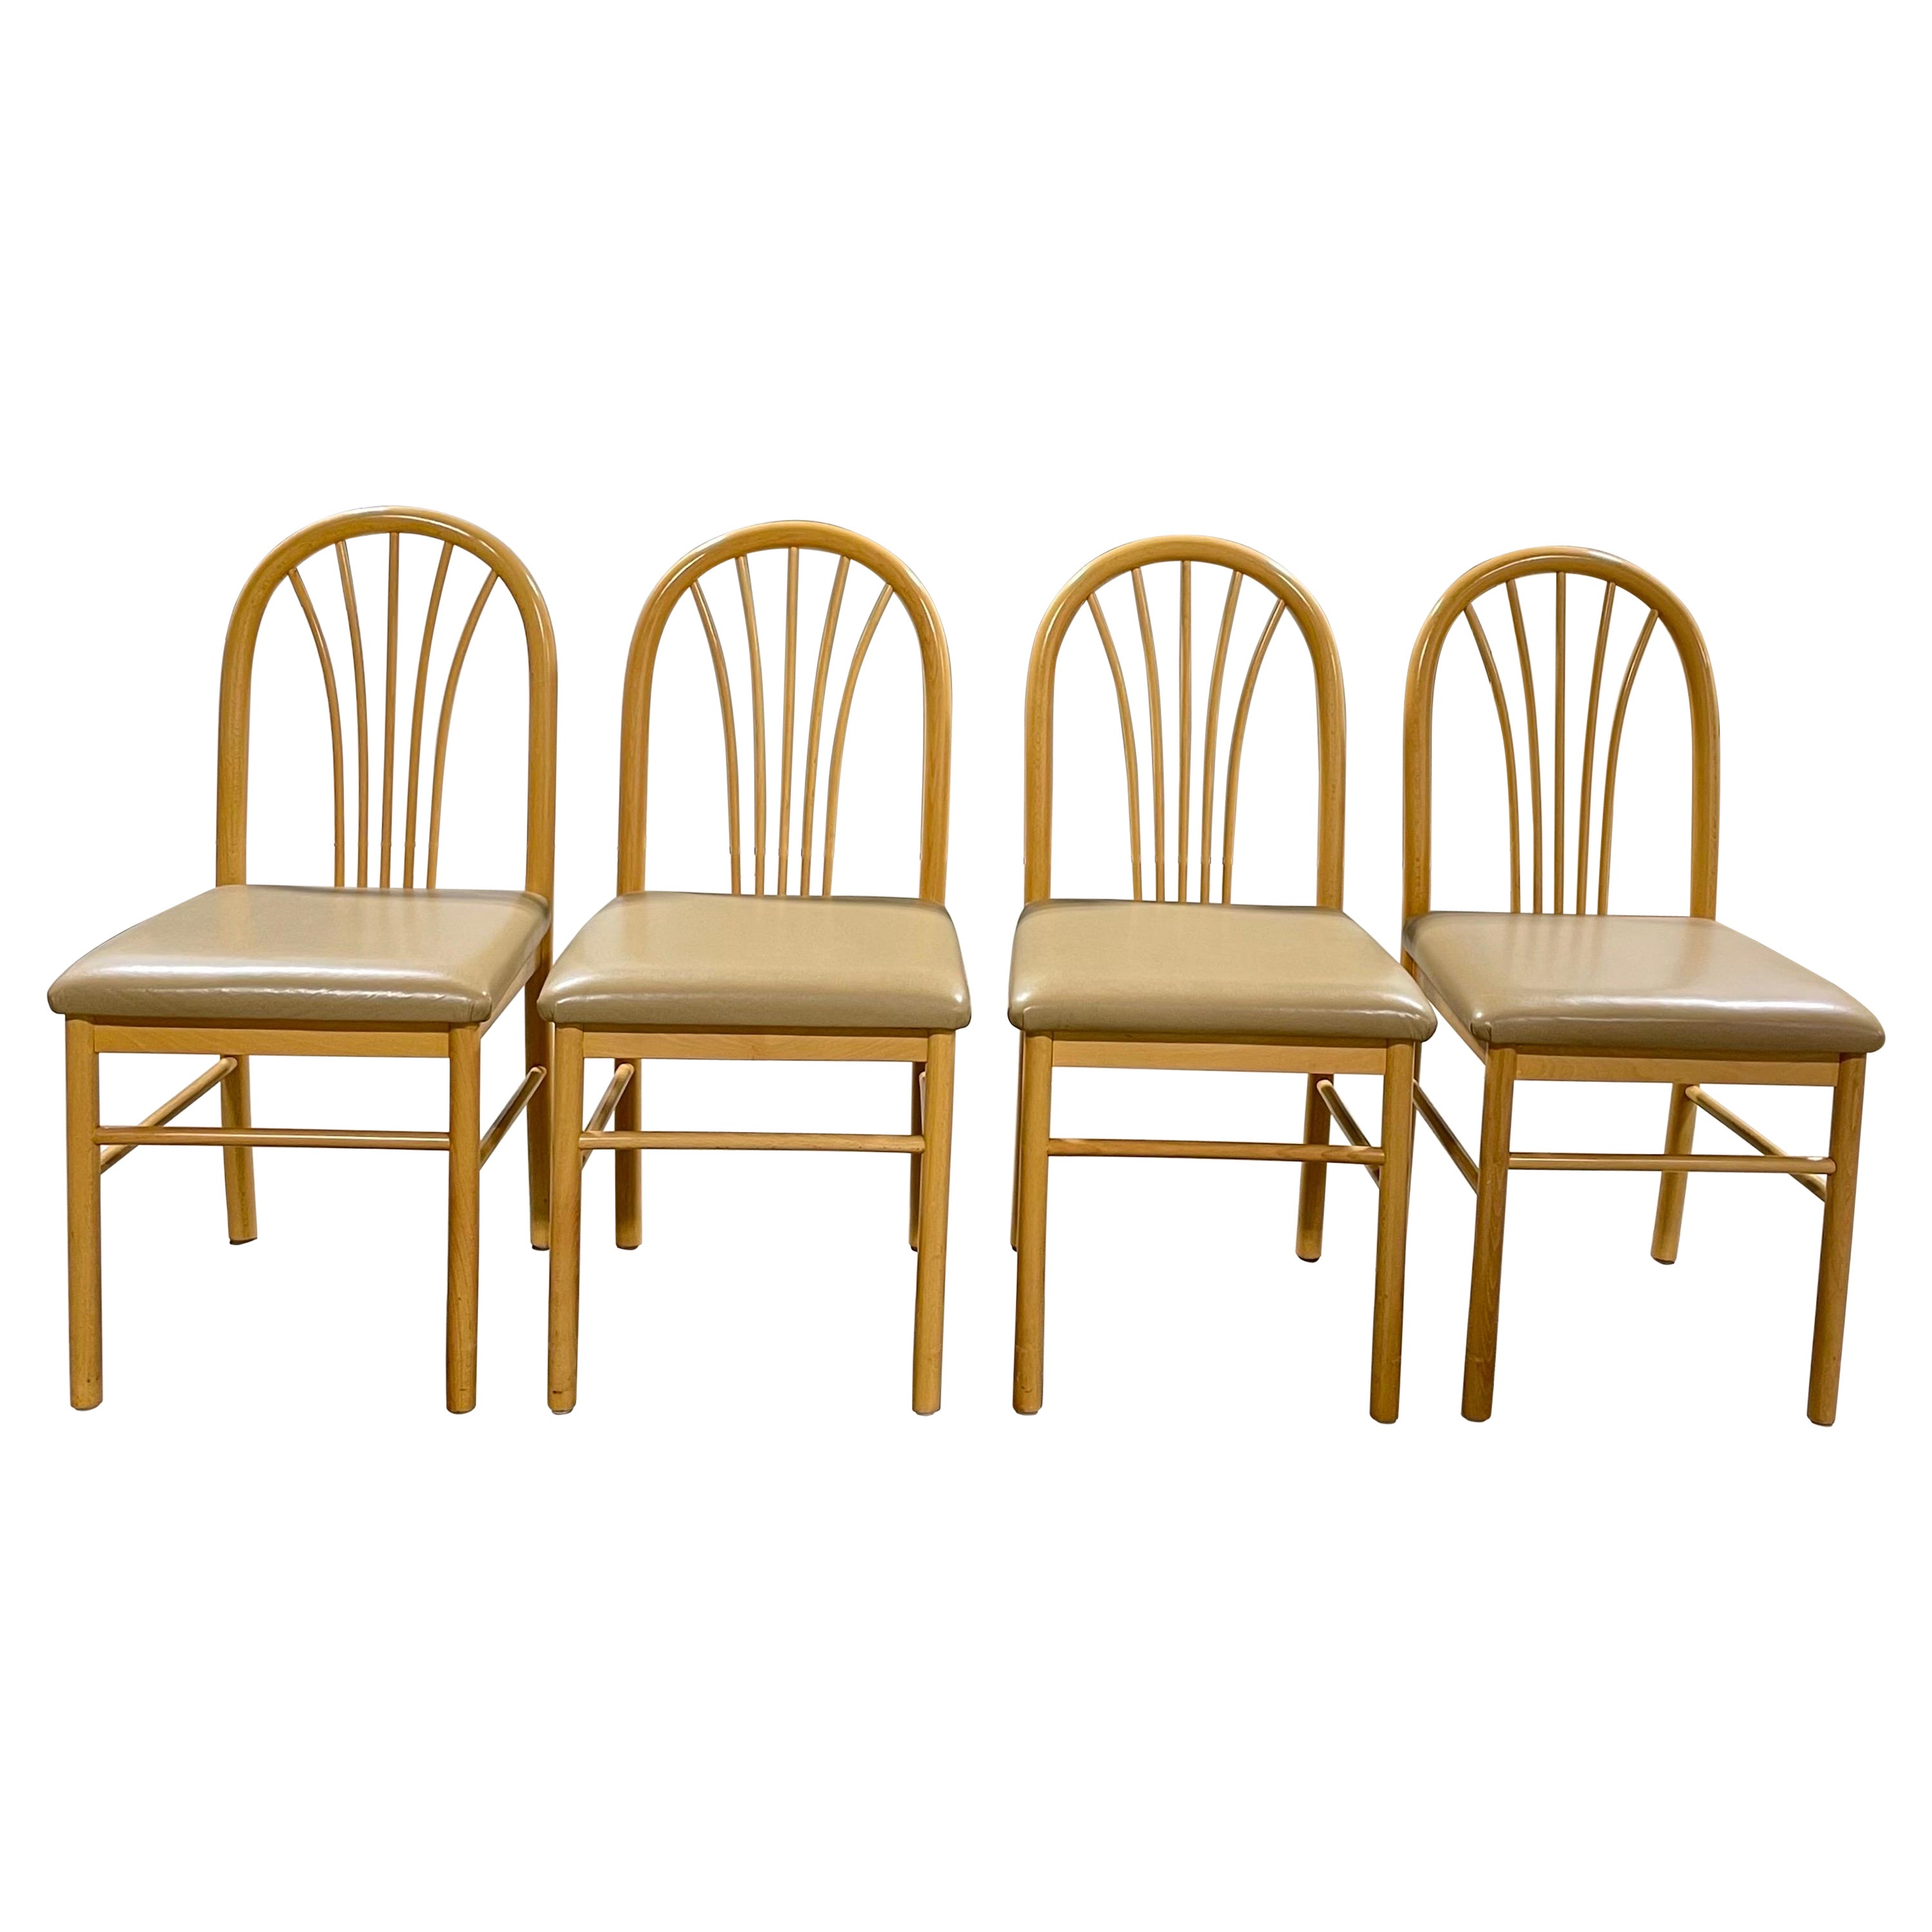 80's Postmodern Curved Dining Chairs Annig Sarian Style For Sale